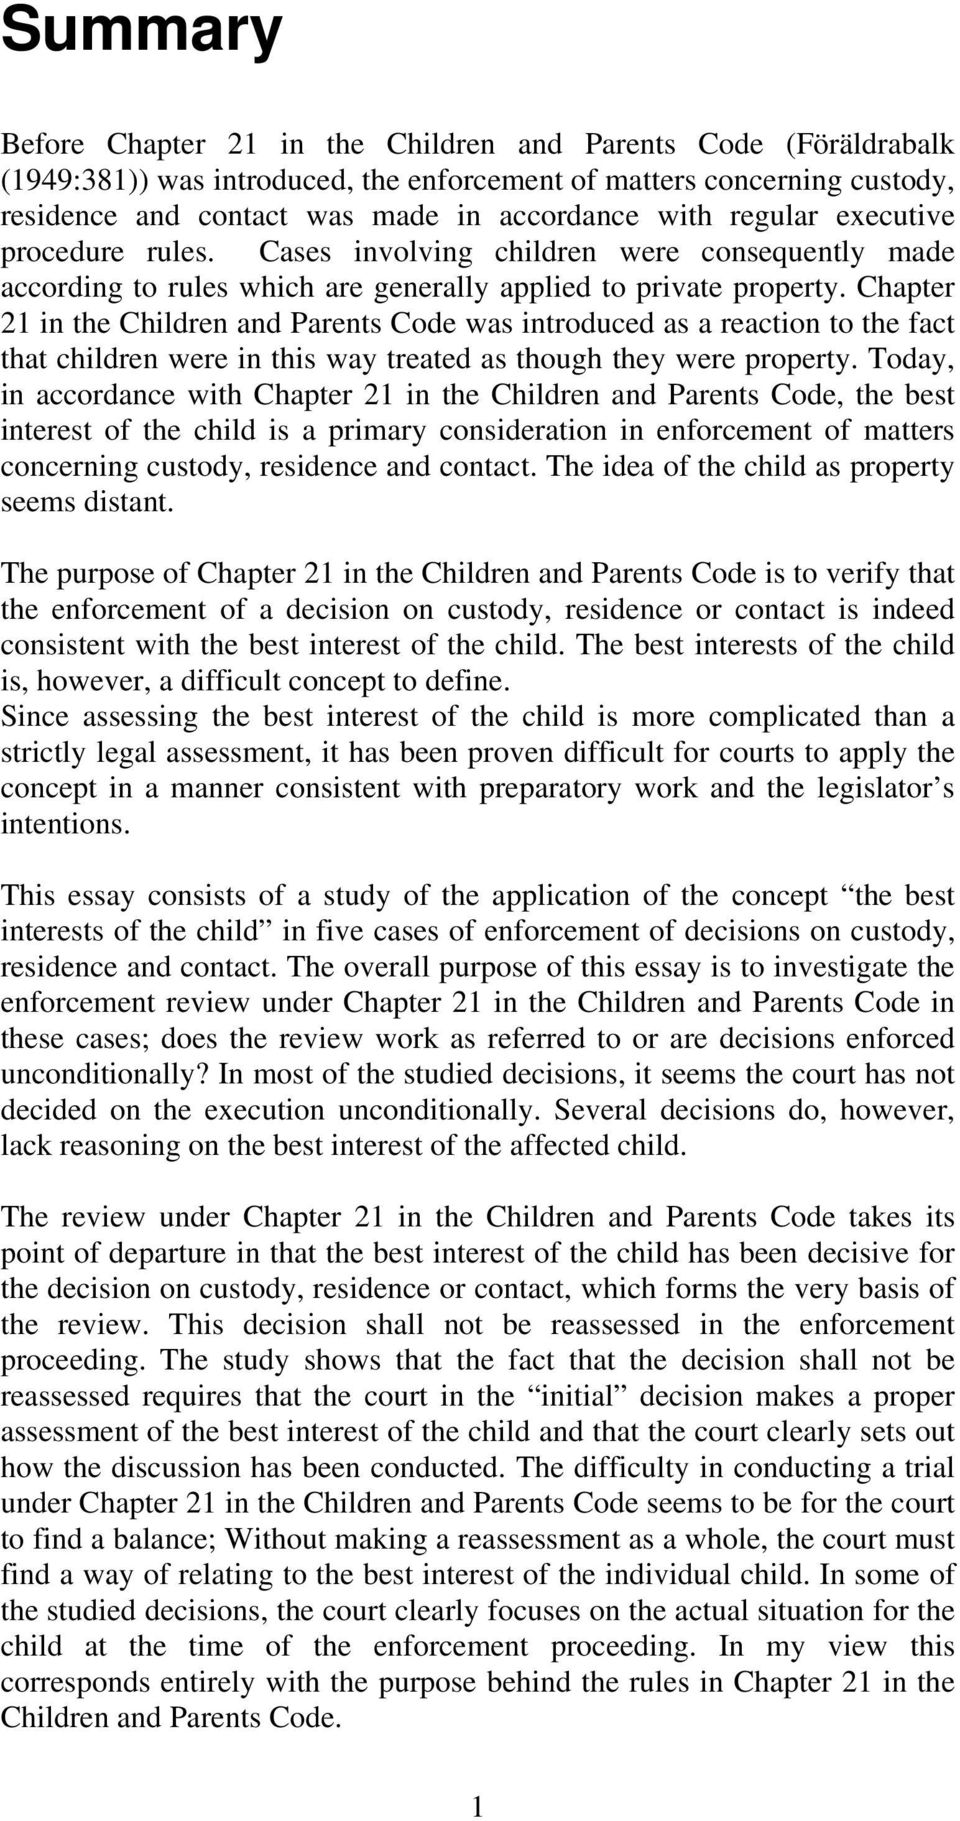 Chapter 21 in the Children and Parents Code was introduced as a reaction to the fact that children were in this way treated as though they were property.